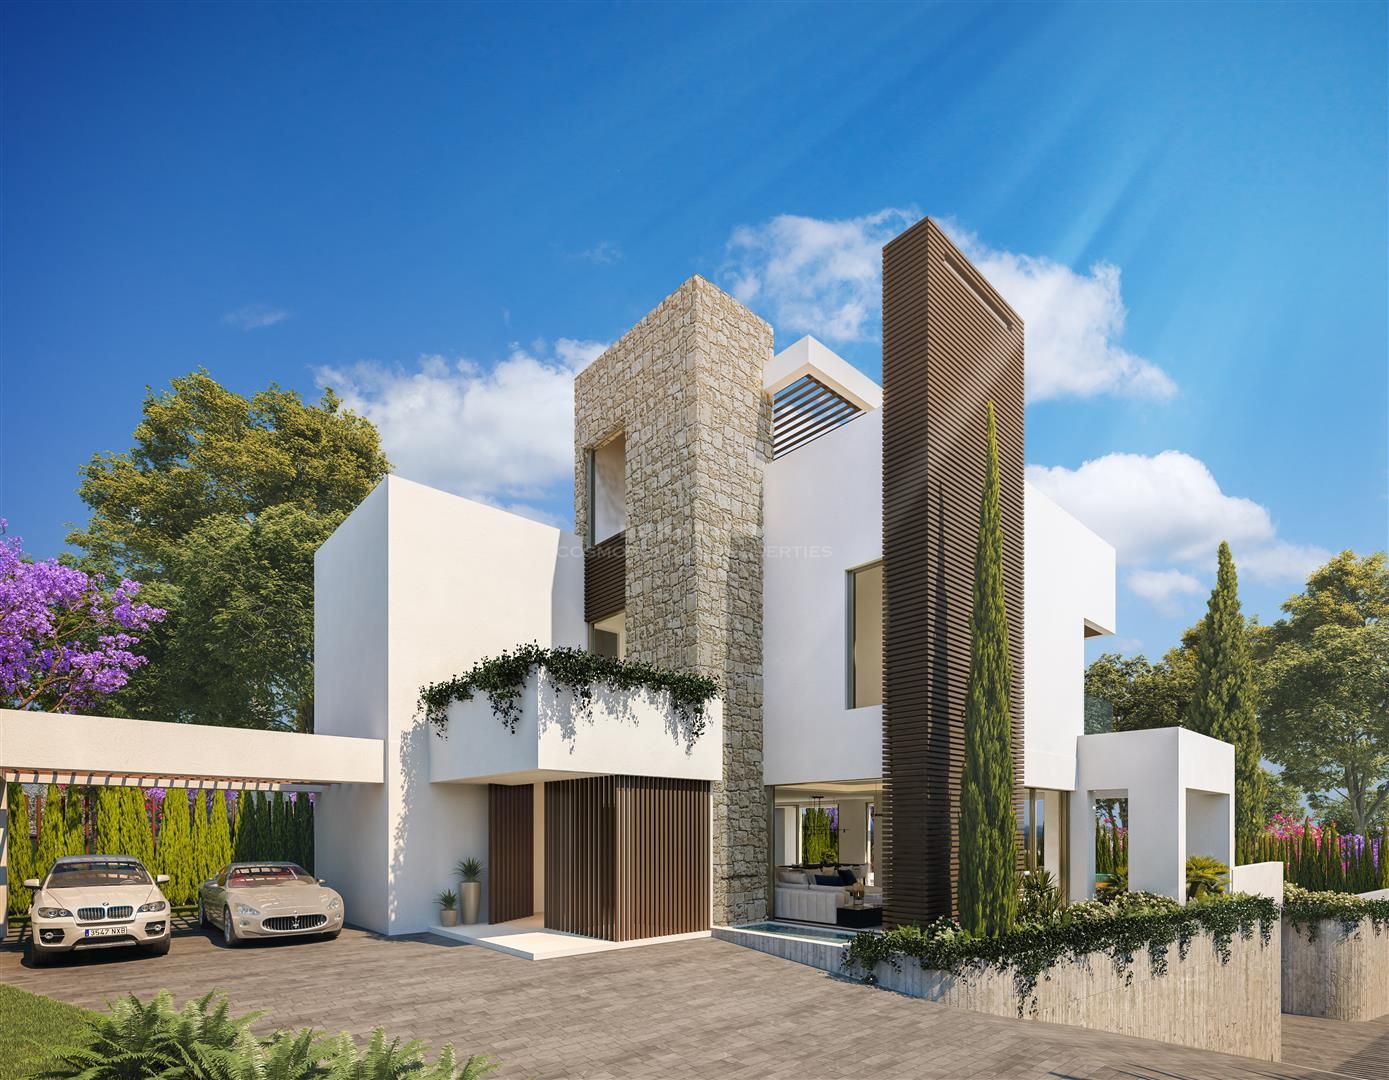 Spectacular brand new modern style villa a few steps from the beach, in the center of Marbella